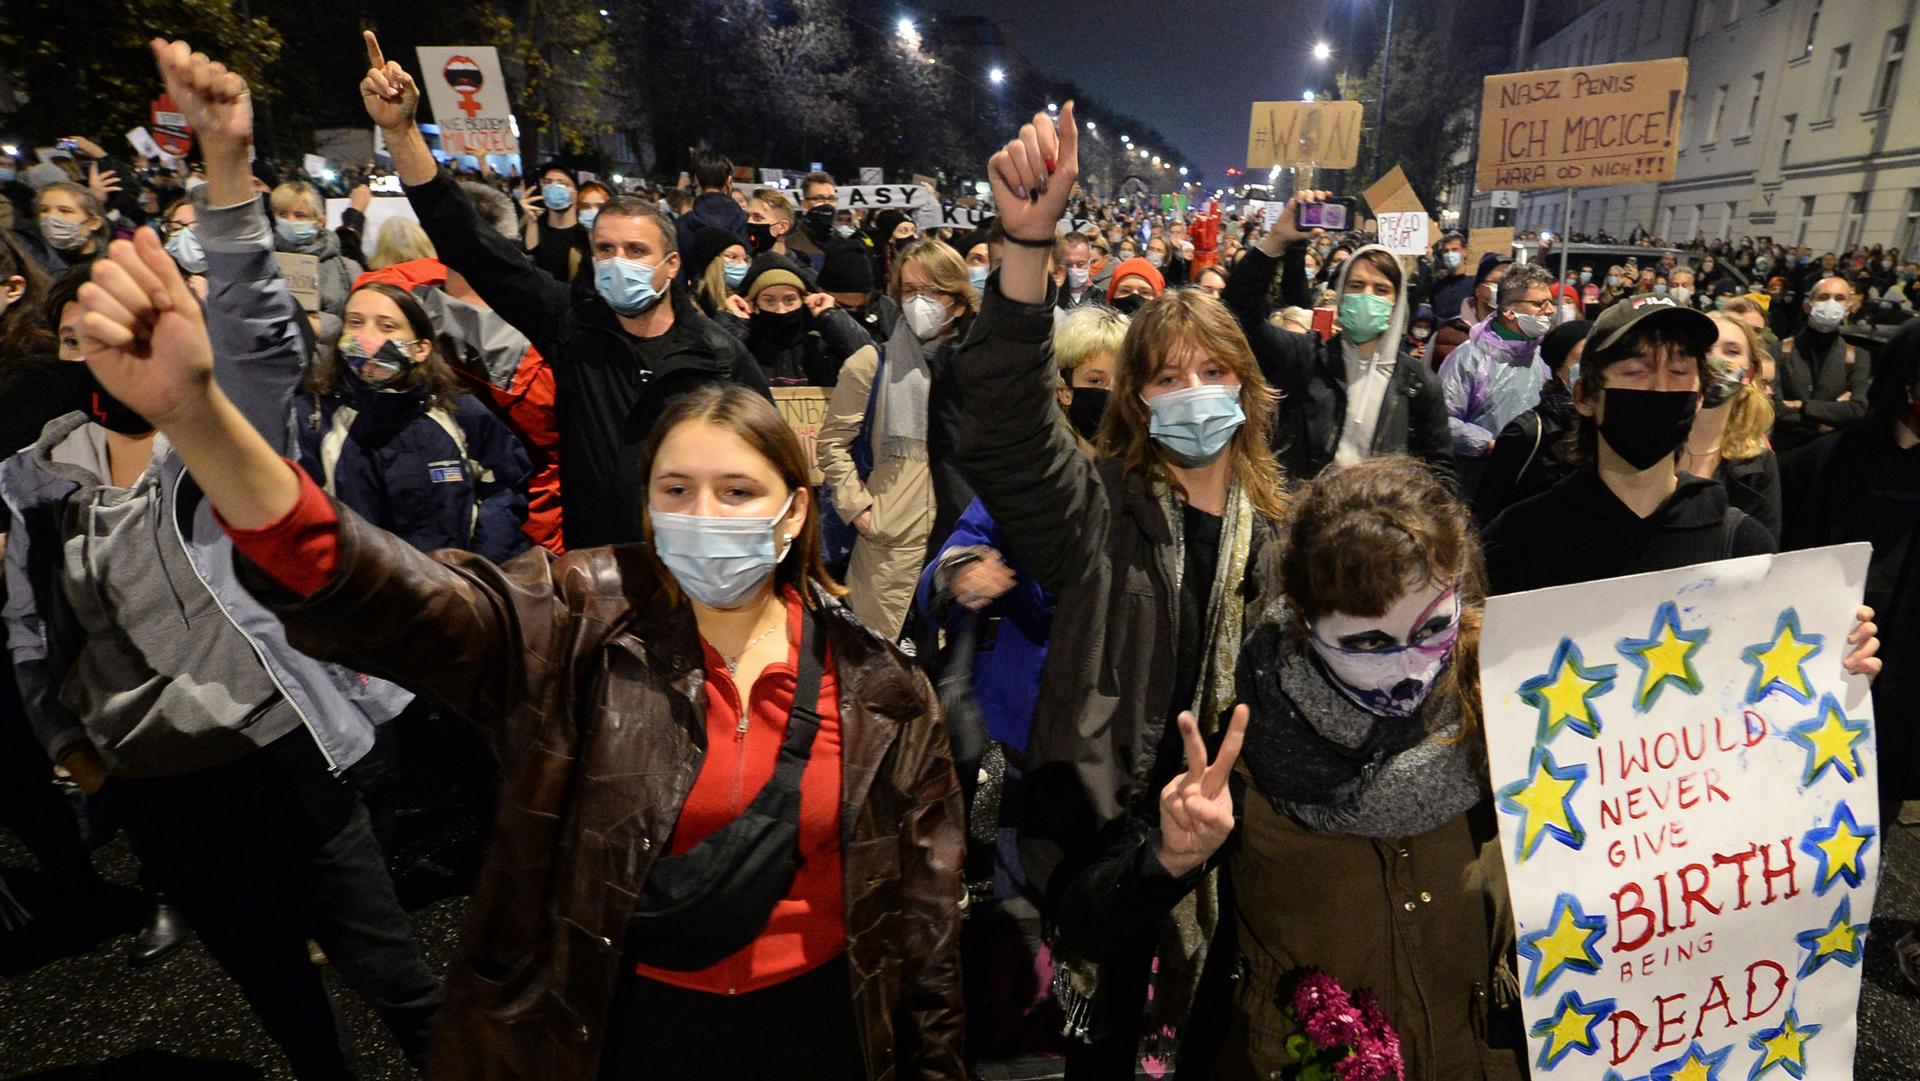 A large crowd of people are show in the street — many wearing protective face masks and carrying signs.